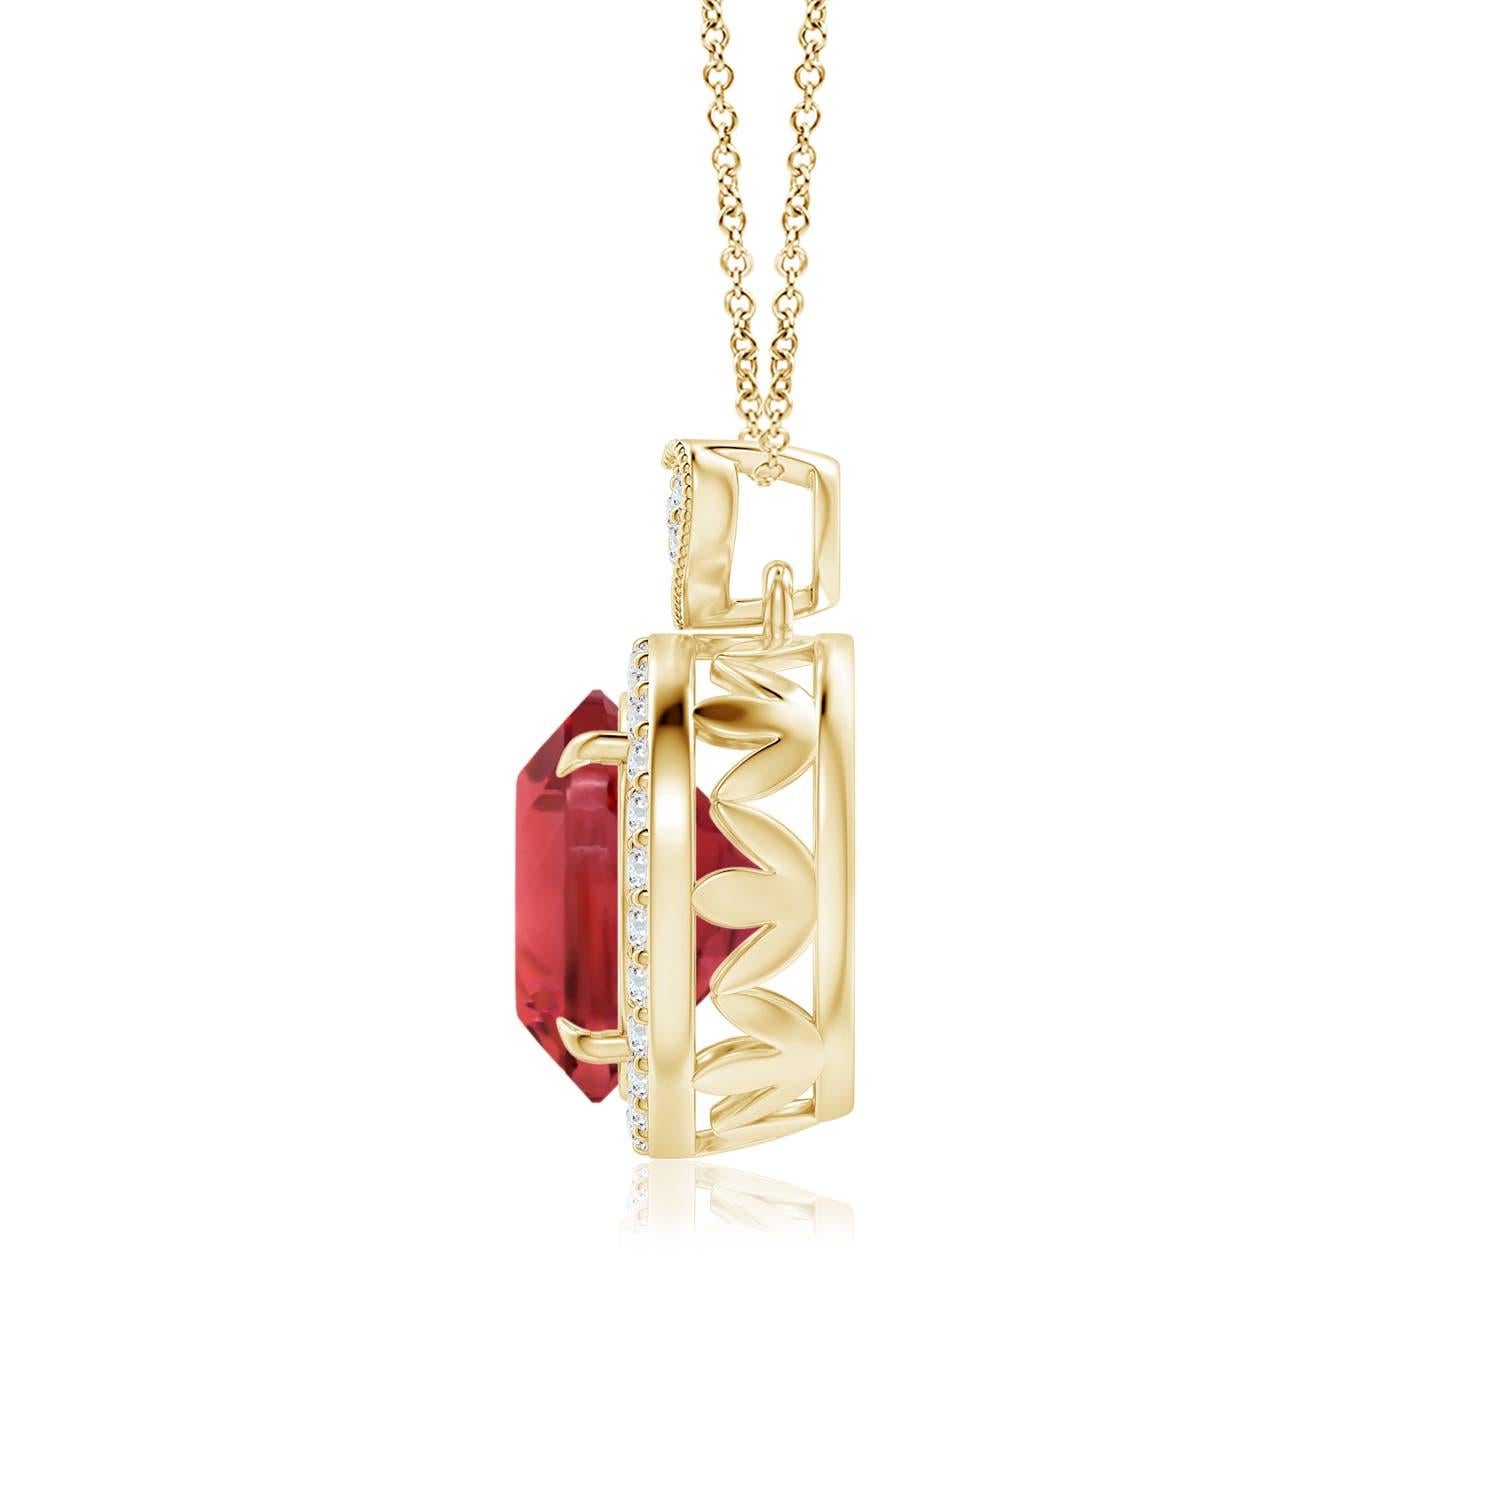 Embrace your romantic side with this charming pink tourmaline pendant, crafted in 18k yellow gold. The GIA certified pink tourmaline is claw-set within a halo of sparkling diamonds. It is topped with a diamond-encrusted heart-shaped bale, fringed